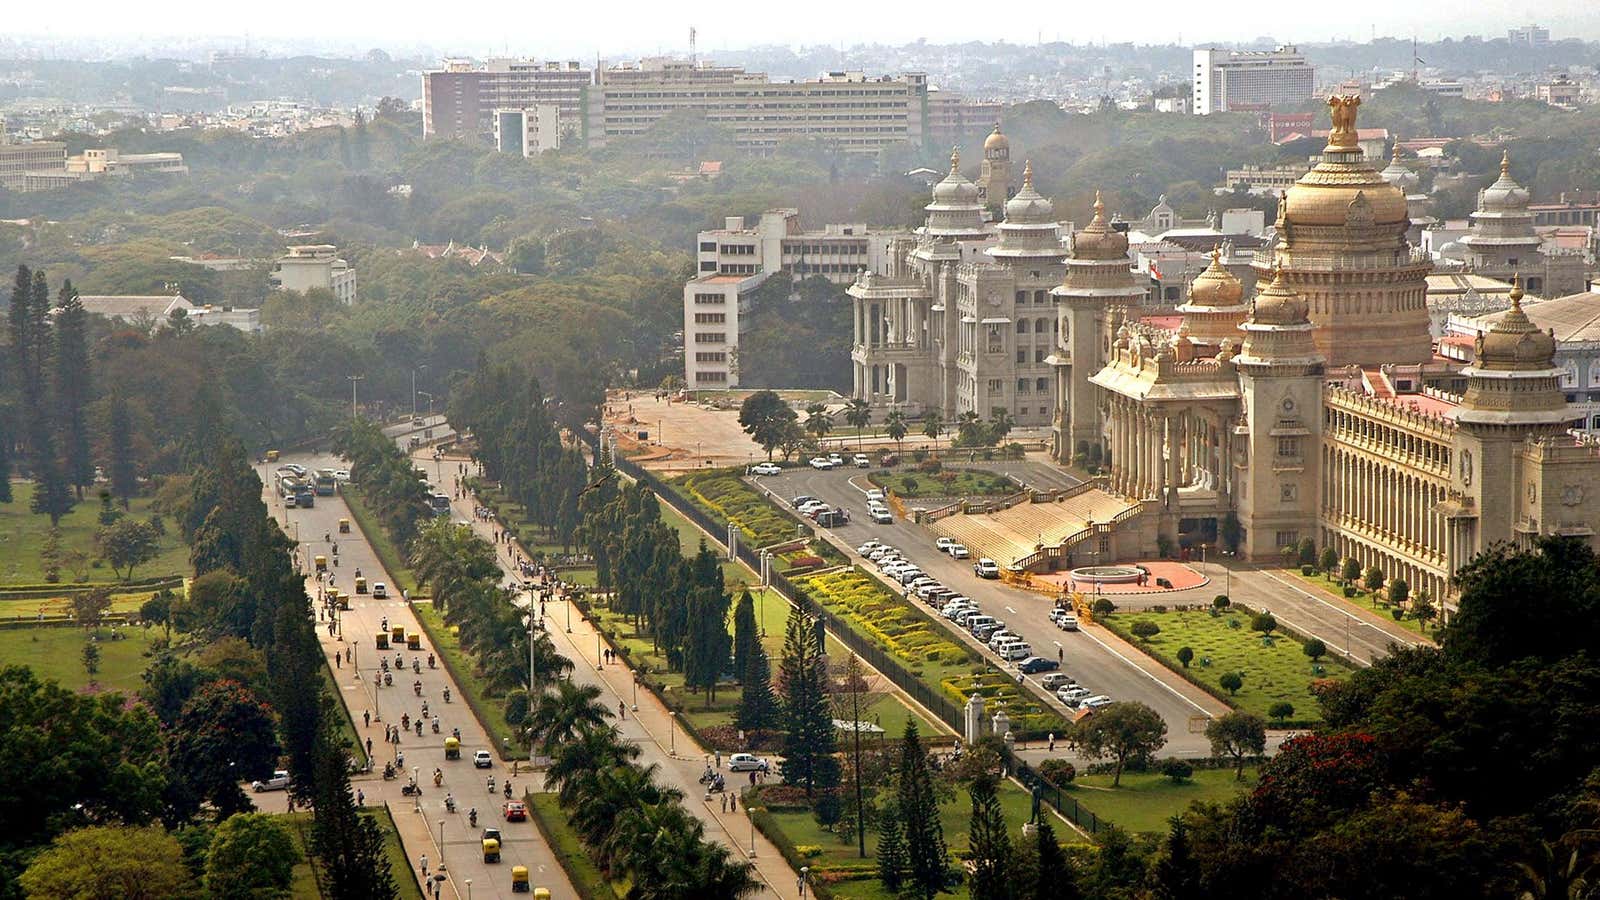 India’s supreme court thinks Bengaluru has become a template for urban ruin